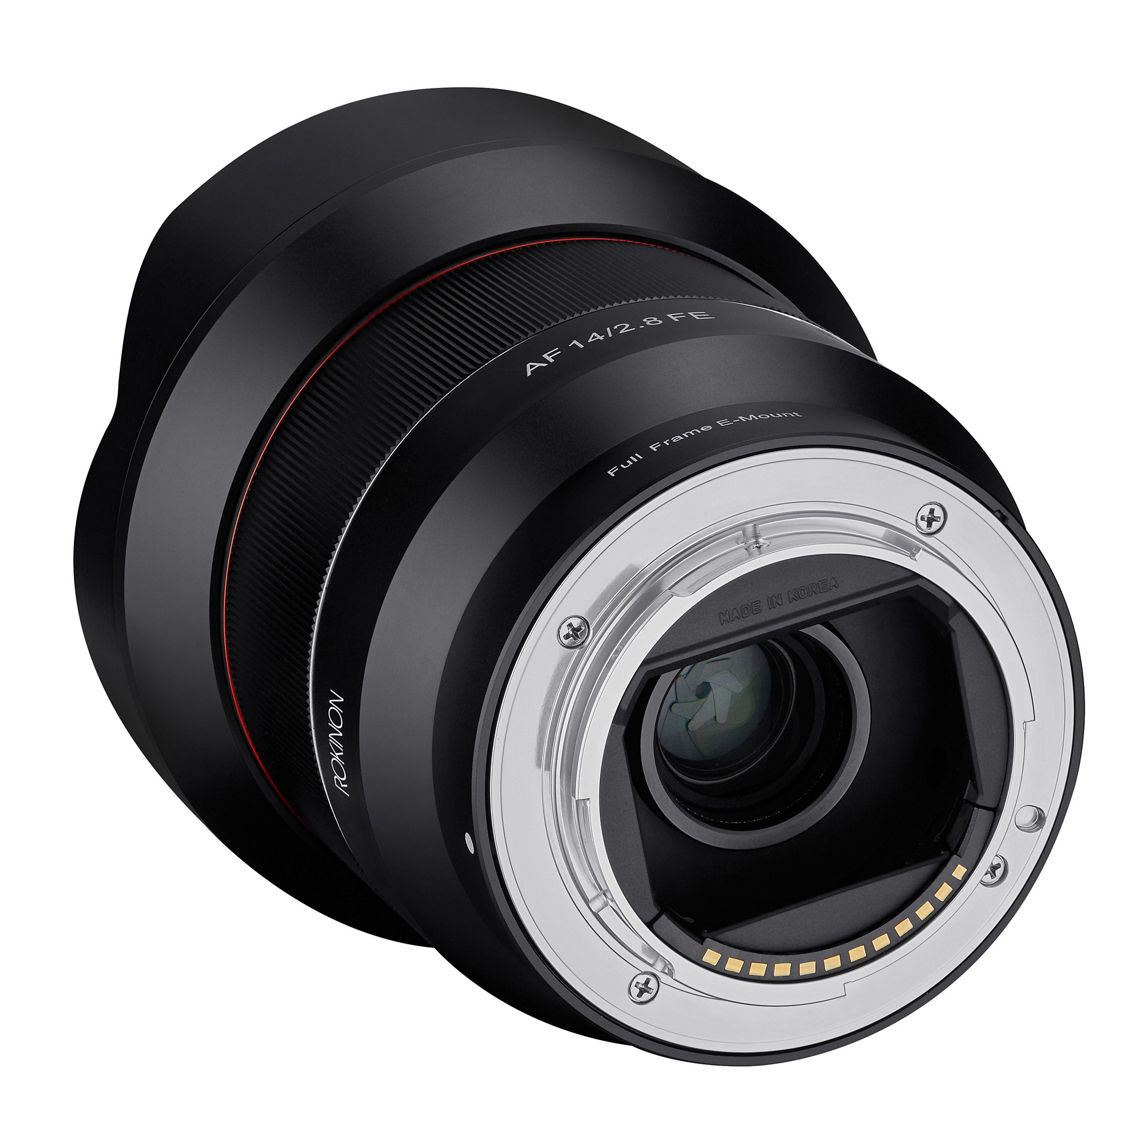 Rokinon 14mm F2.8 AF Full Frame Ultra Wide Angle Lens for Sony E - Image 4 of 5